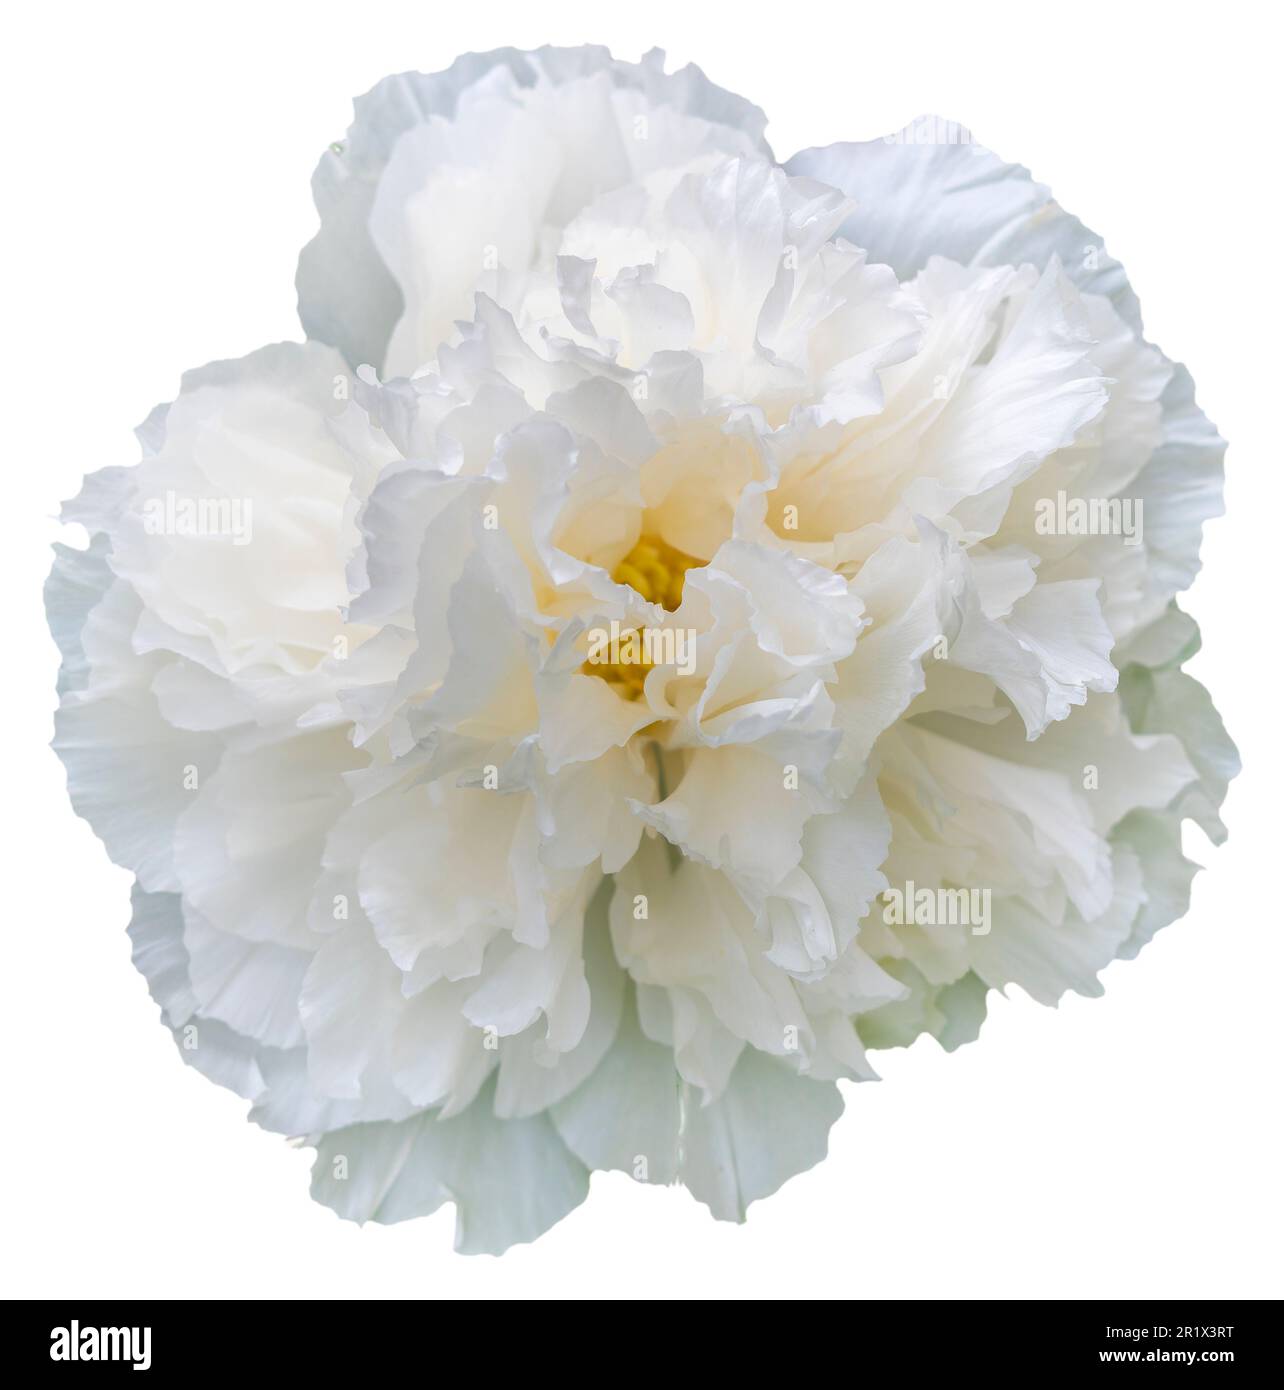 A blooming peony flower with white petals in color. Isolated. Blooming Beauty: Capturing the Vibrant Colors of Peony Season. Sun-Link-Sea Stock Photo